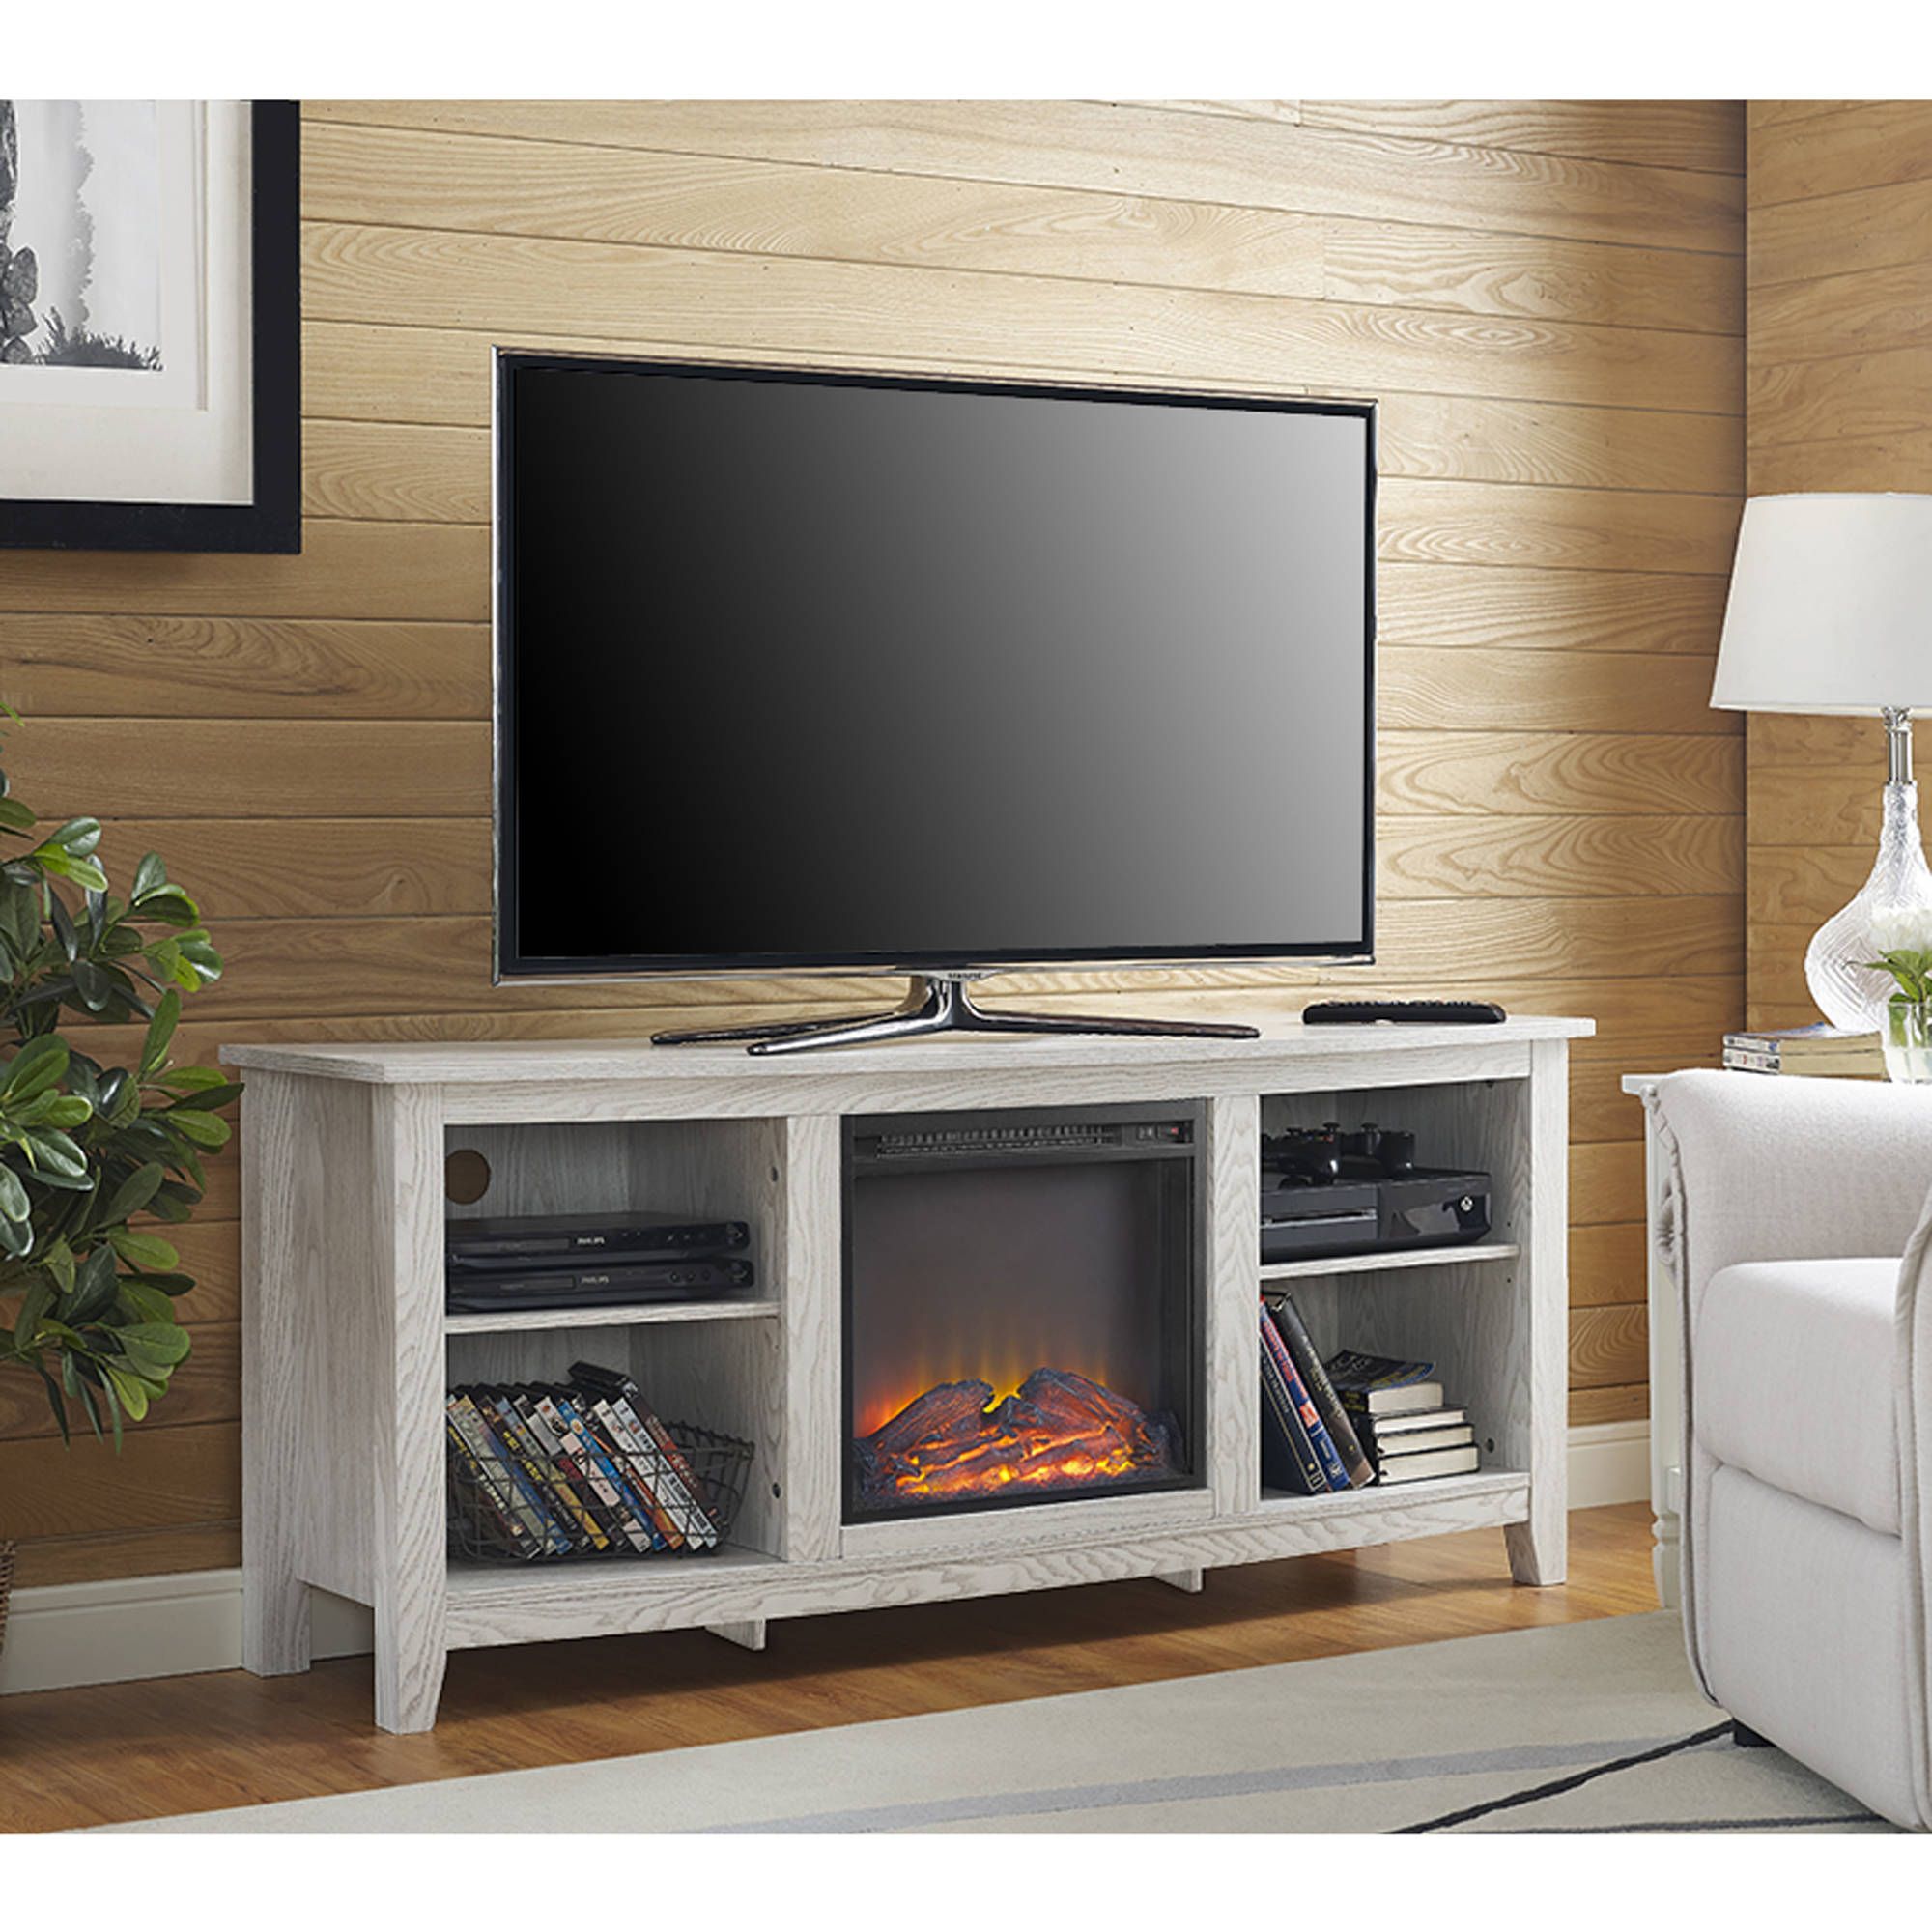 Whitewash Wood Fireplace Tv Stand For Tvs Up To 60" | Ebay With Regard To Wood Tv Stands (View 11 of 15)